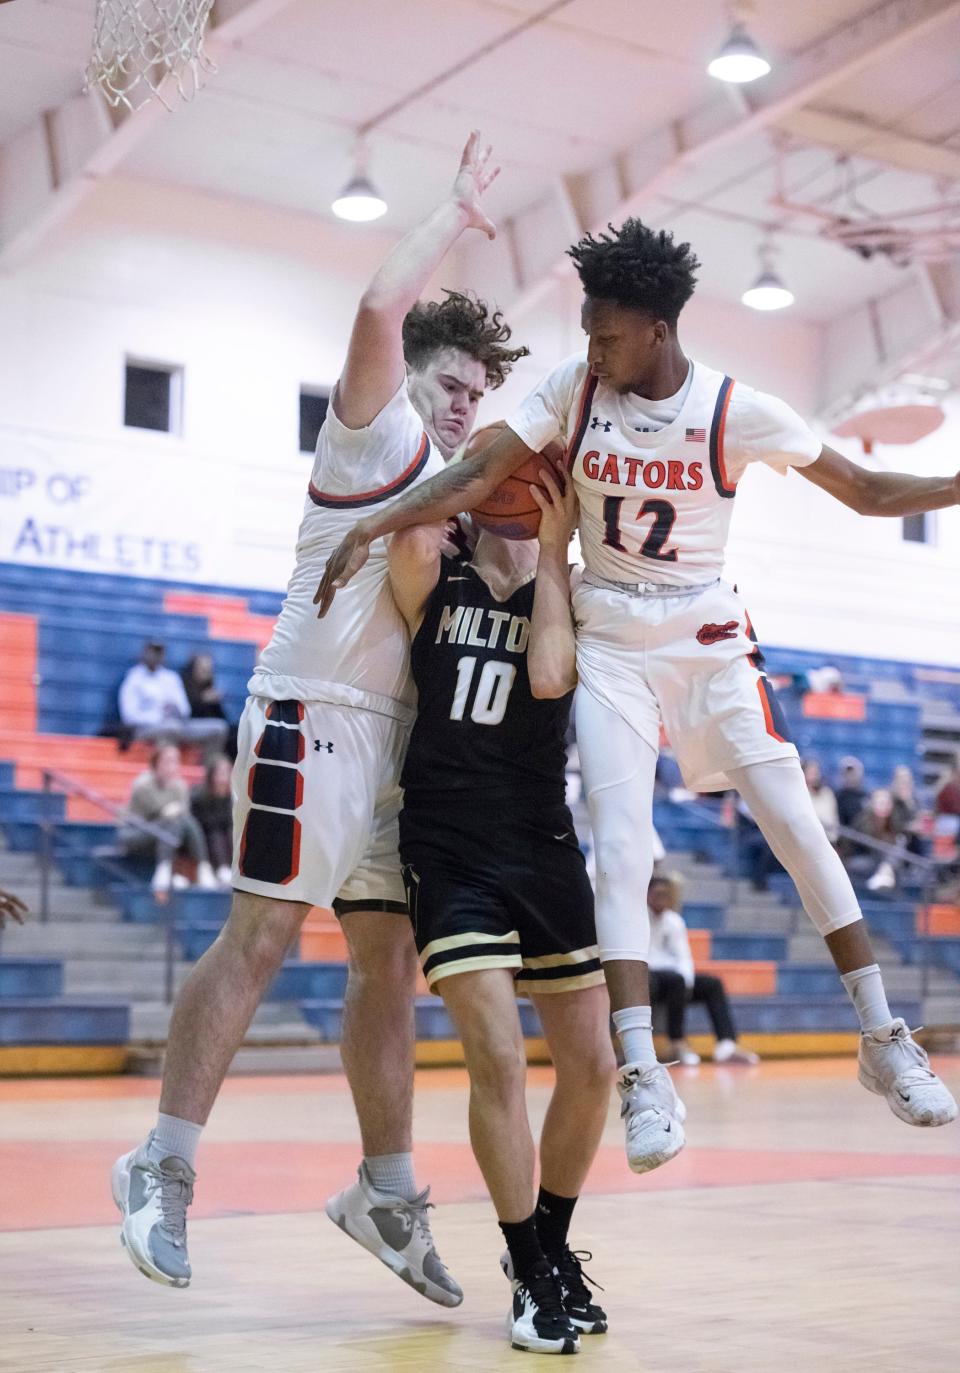 Corey Scott (32) and Keondre Averhart (12) converge on Hayden Mock (10) as he attempts to shoot during the Milton v Escambia boys basketball game at Escambia High School in Pensacola on Thursday, Jan. 6, 2022.